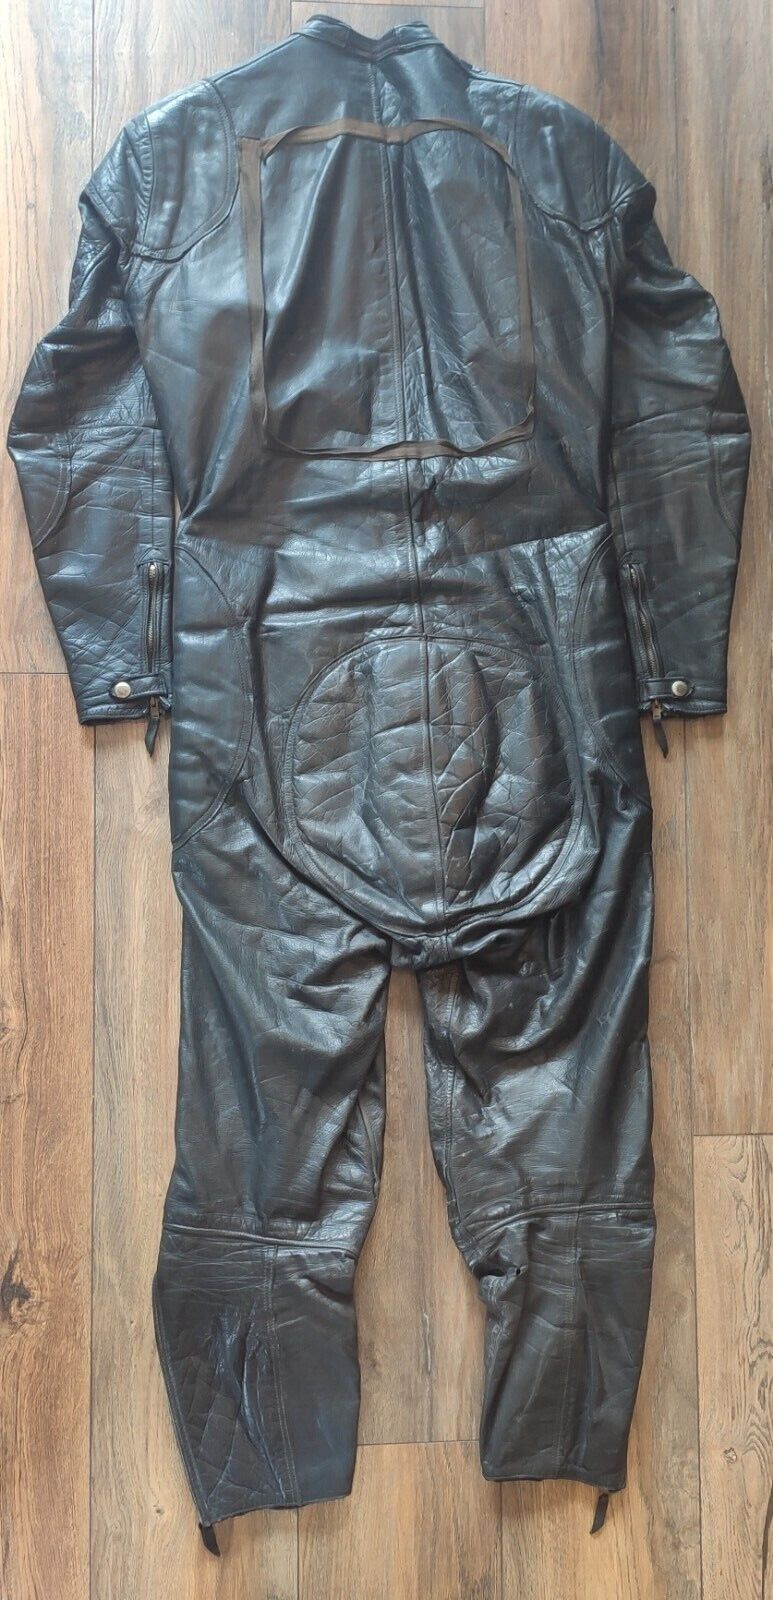 Image of Vintage Aviakit/Lewis Leathers Black Leather Racing Suit Size 38/One Piece